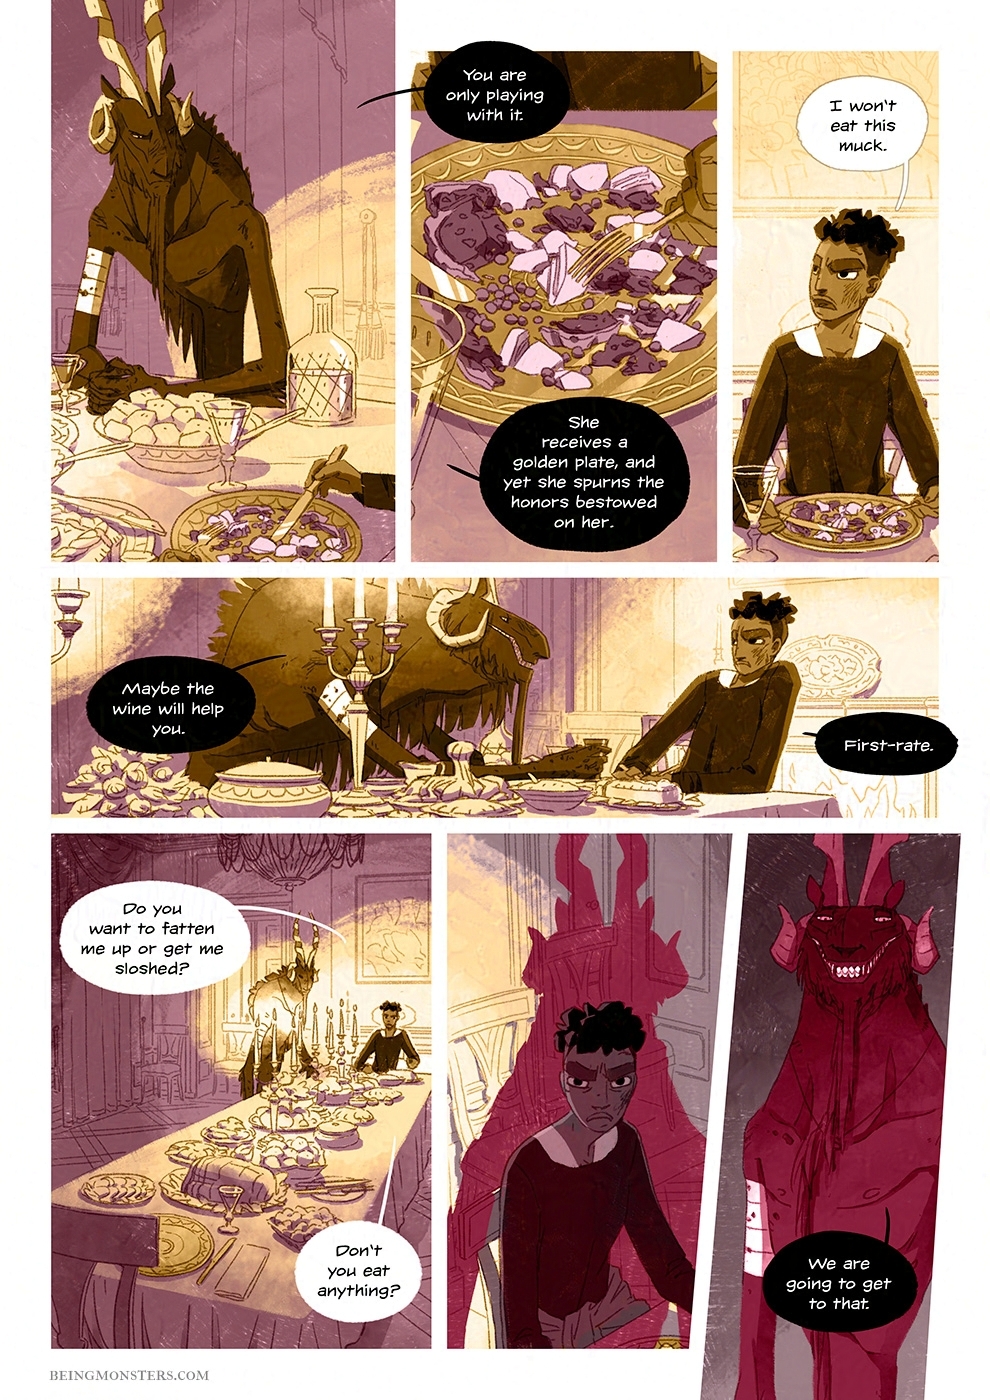 Being Monsters comic Book 2 Chapter 7 Page 18 EN